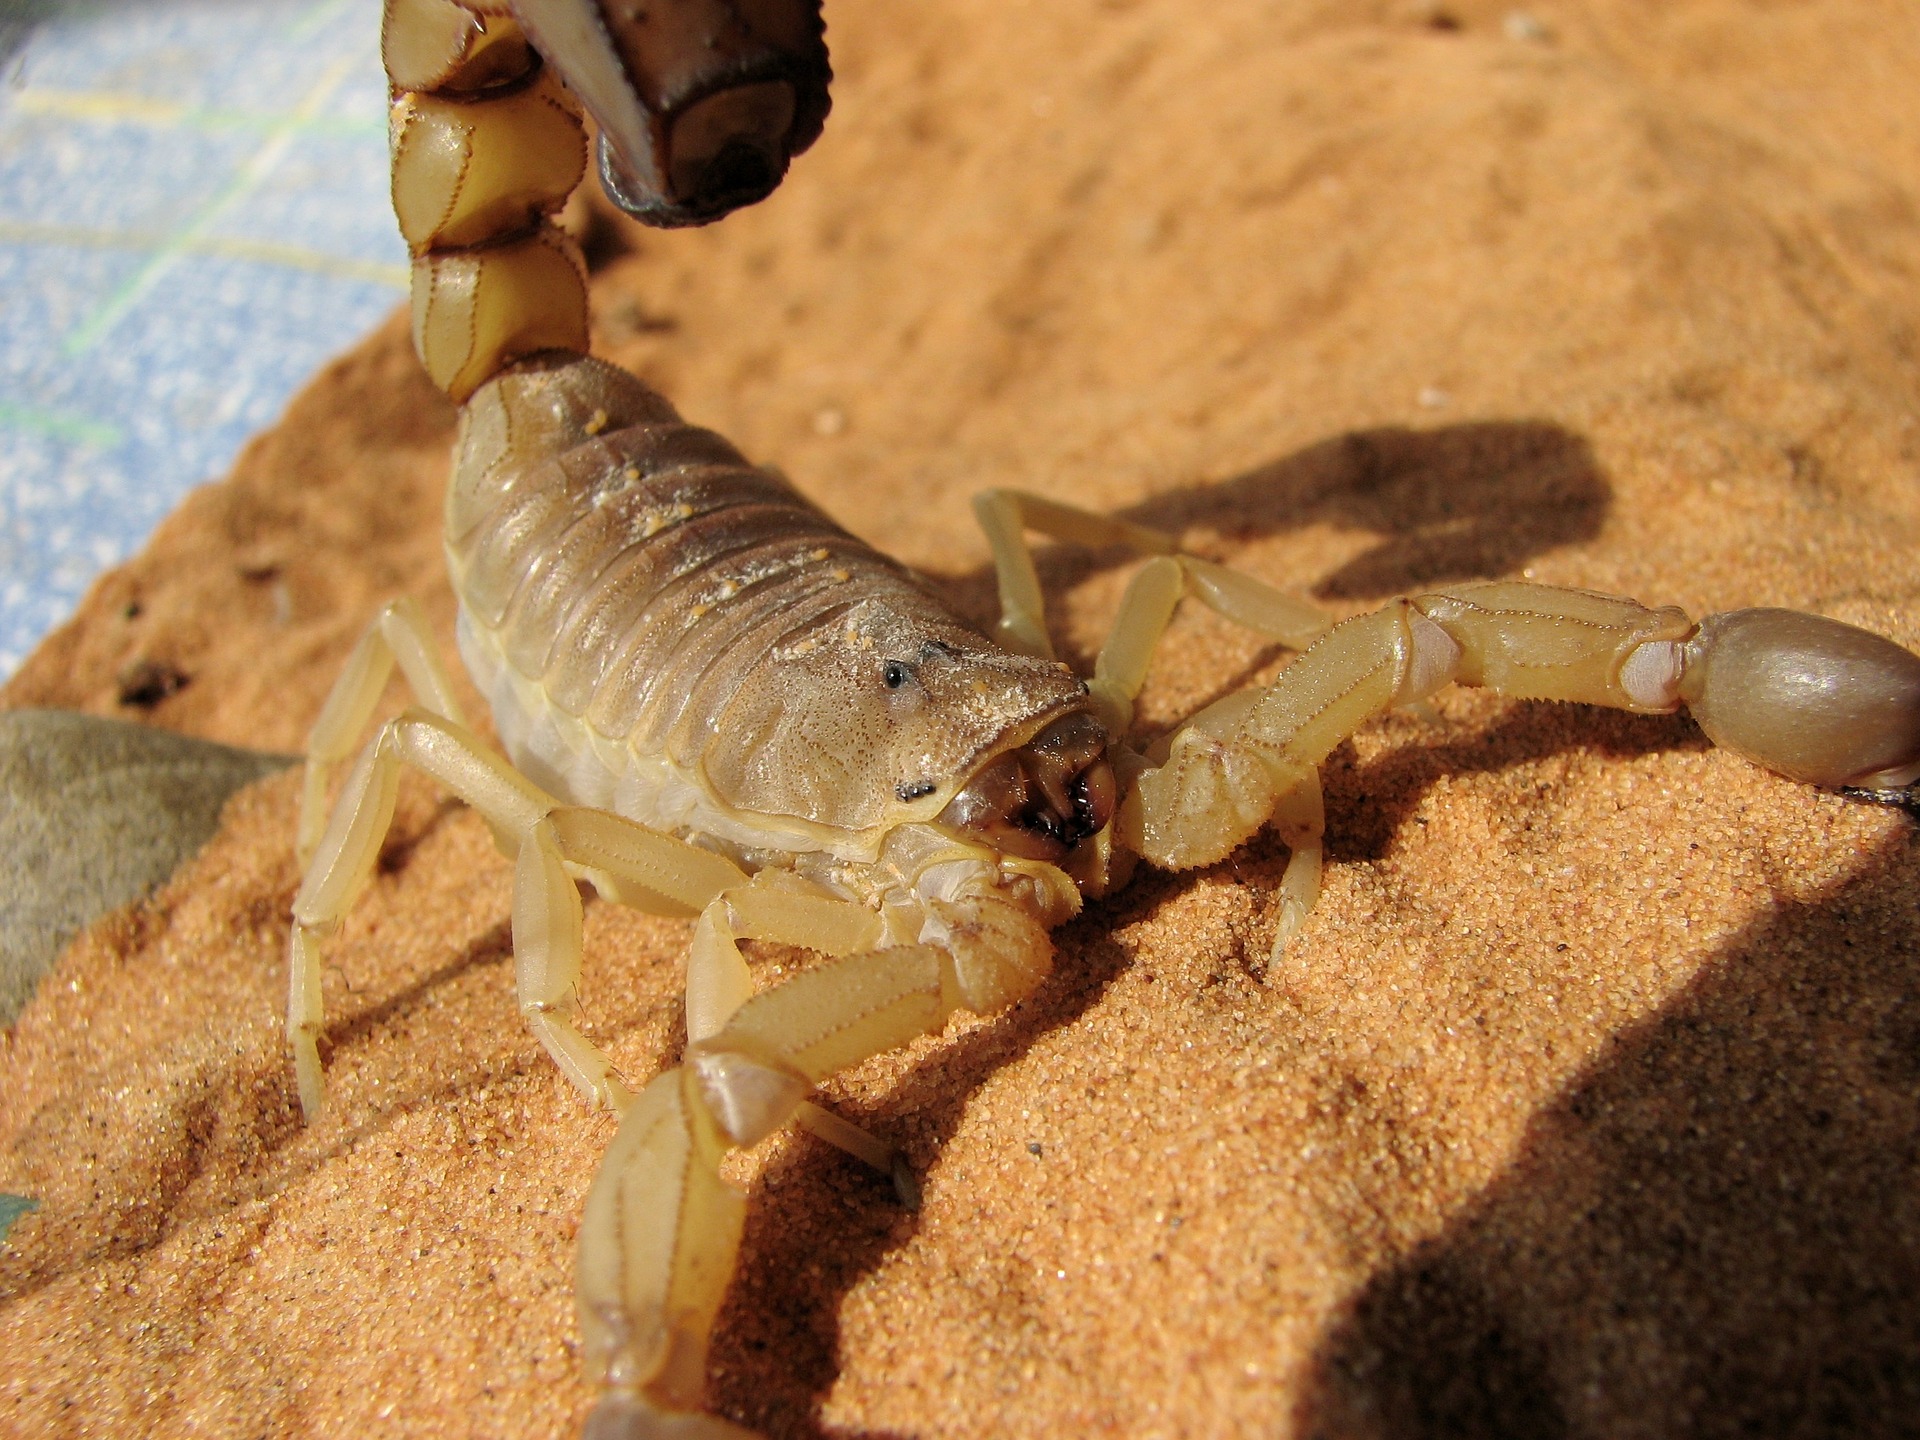 Hot, Dry Summer Has Scorpions In Texas Heading Indoors - Texas A&M Today